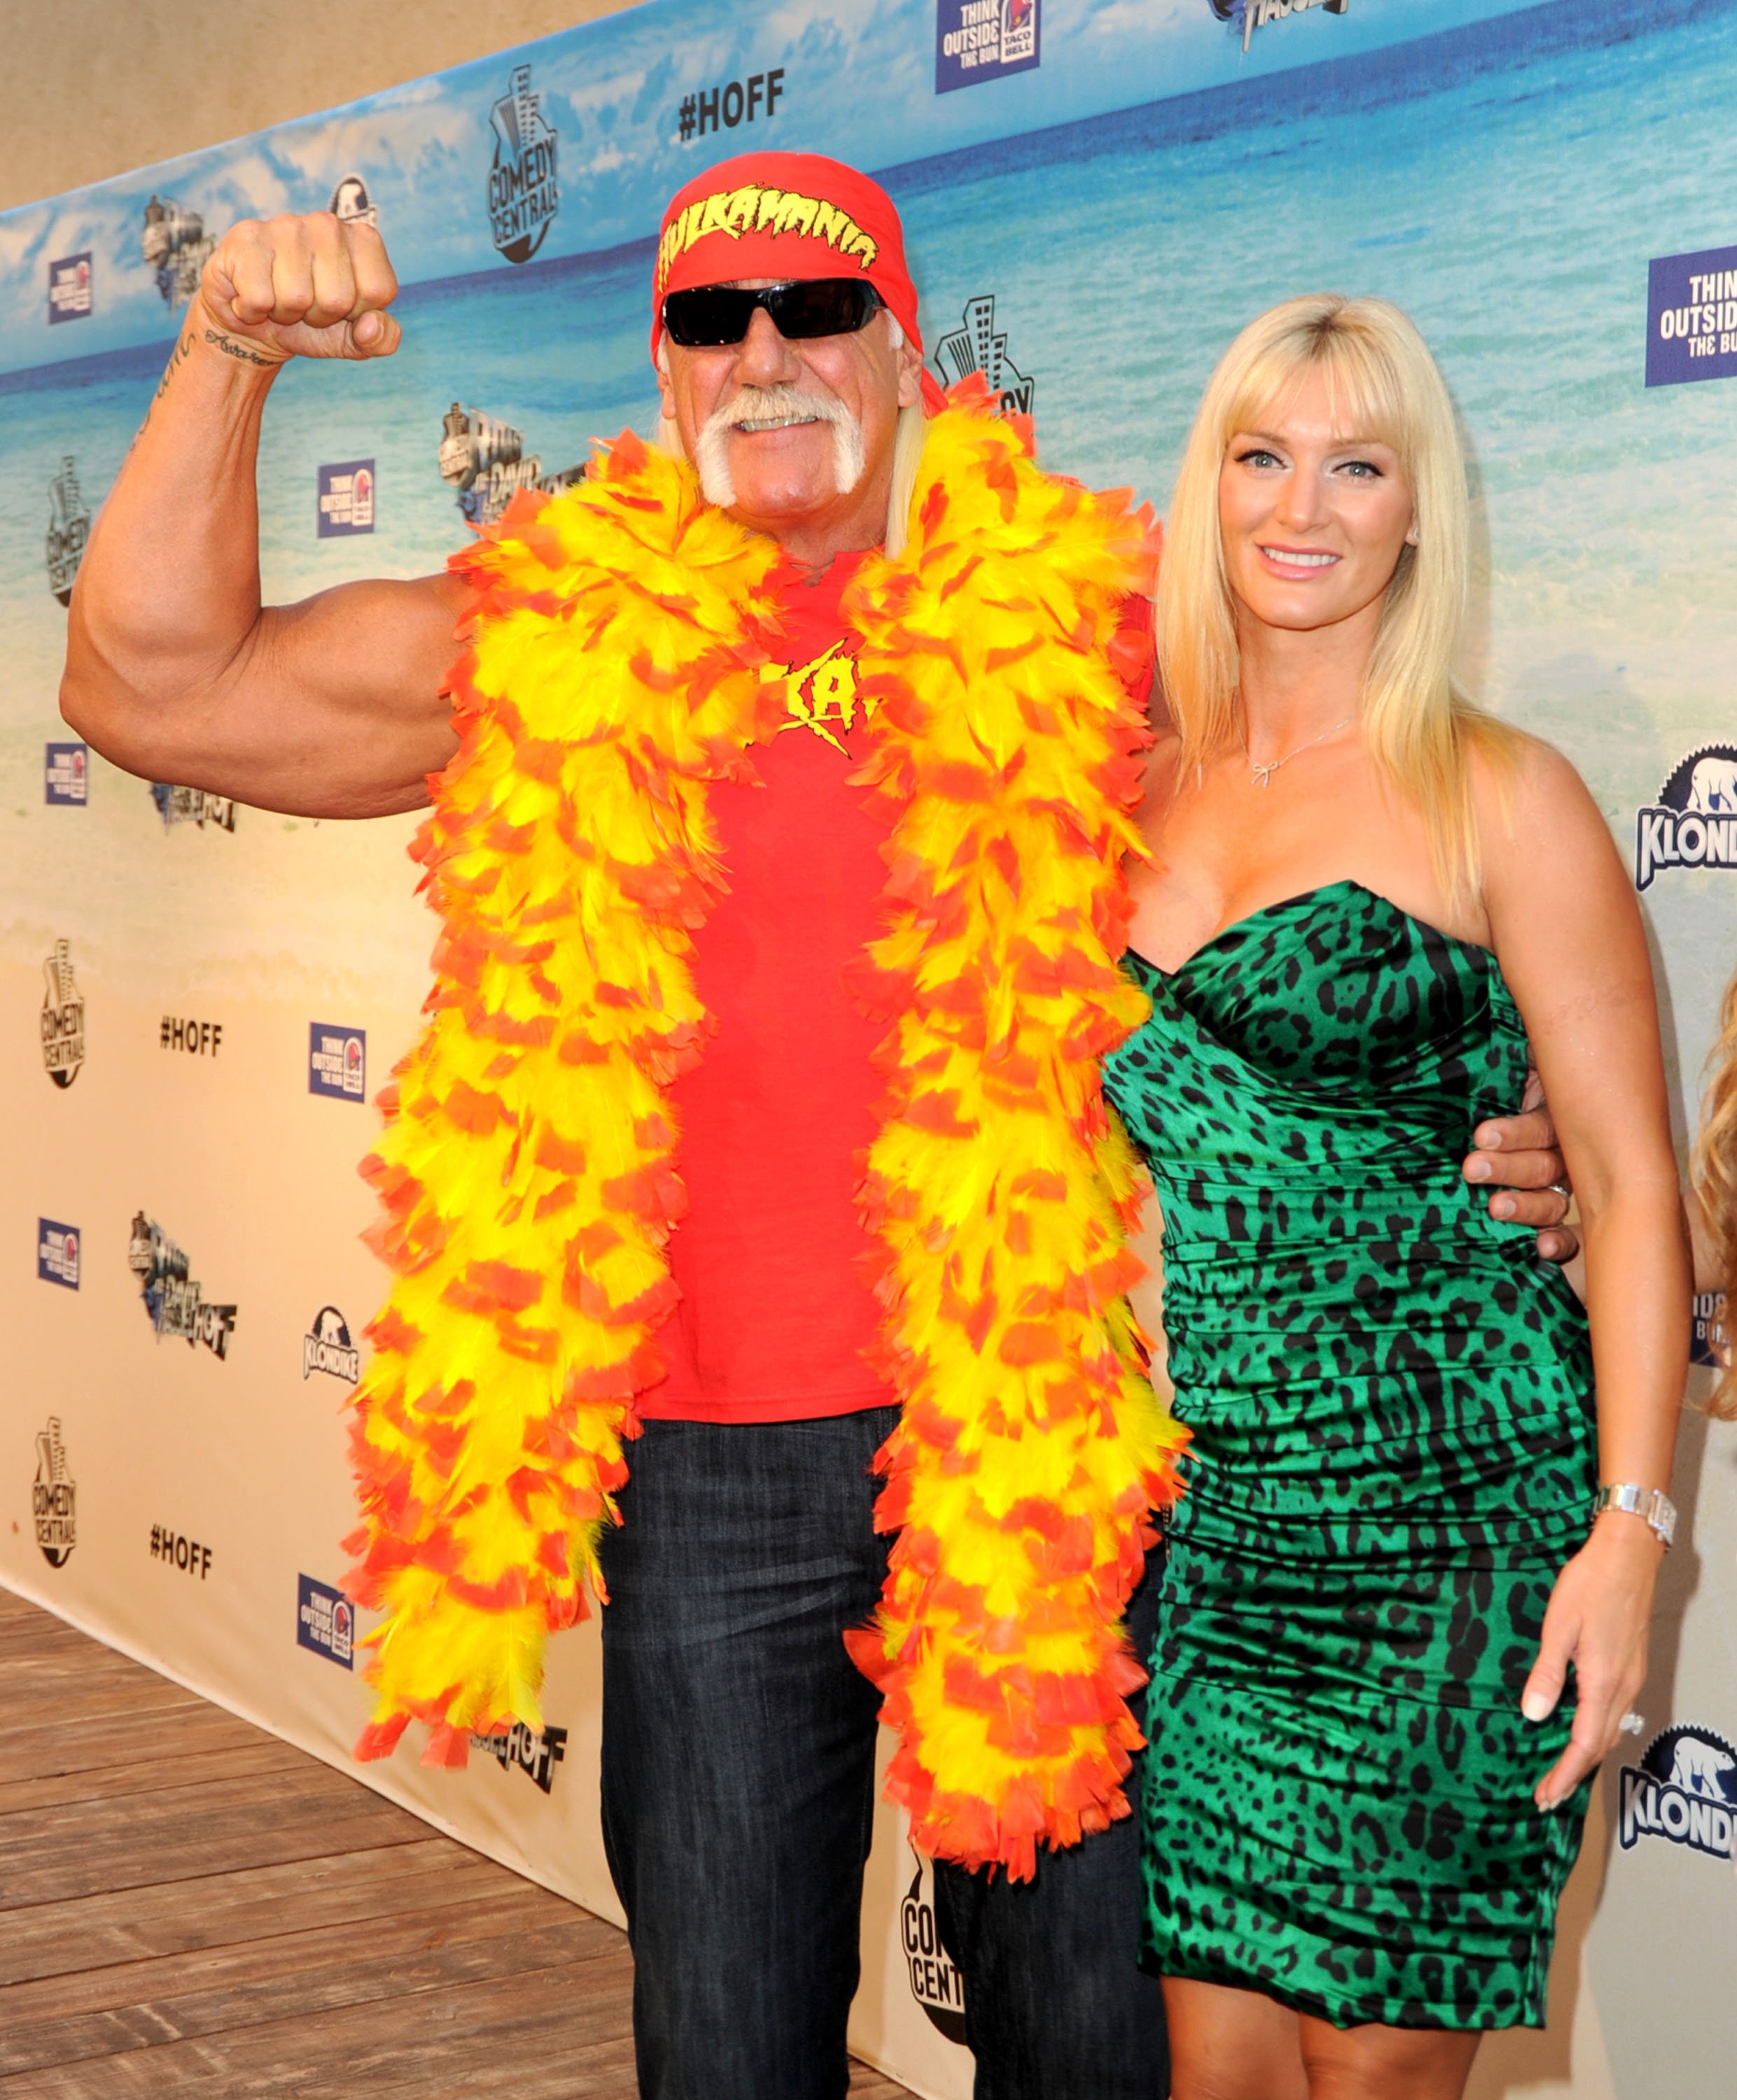 Hulk Hogan and Jennifer McDaniel at the Comedy Central Roast of David Hasselhoff on August 1, 2010, in Culver City, California. | Source: Getty Images